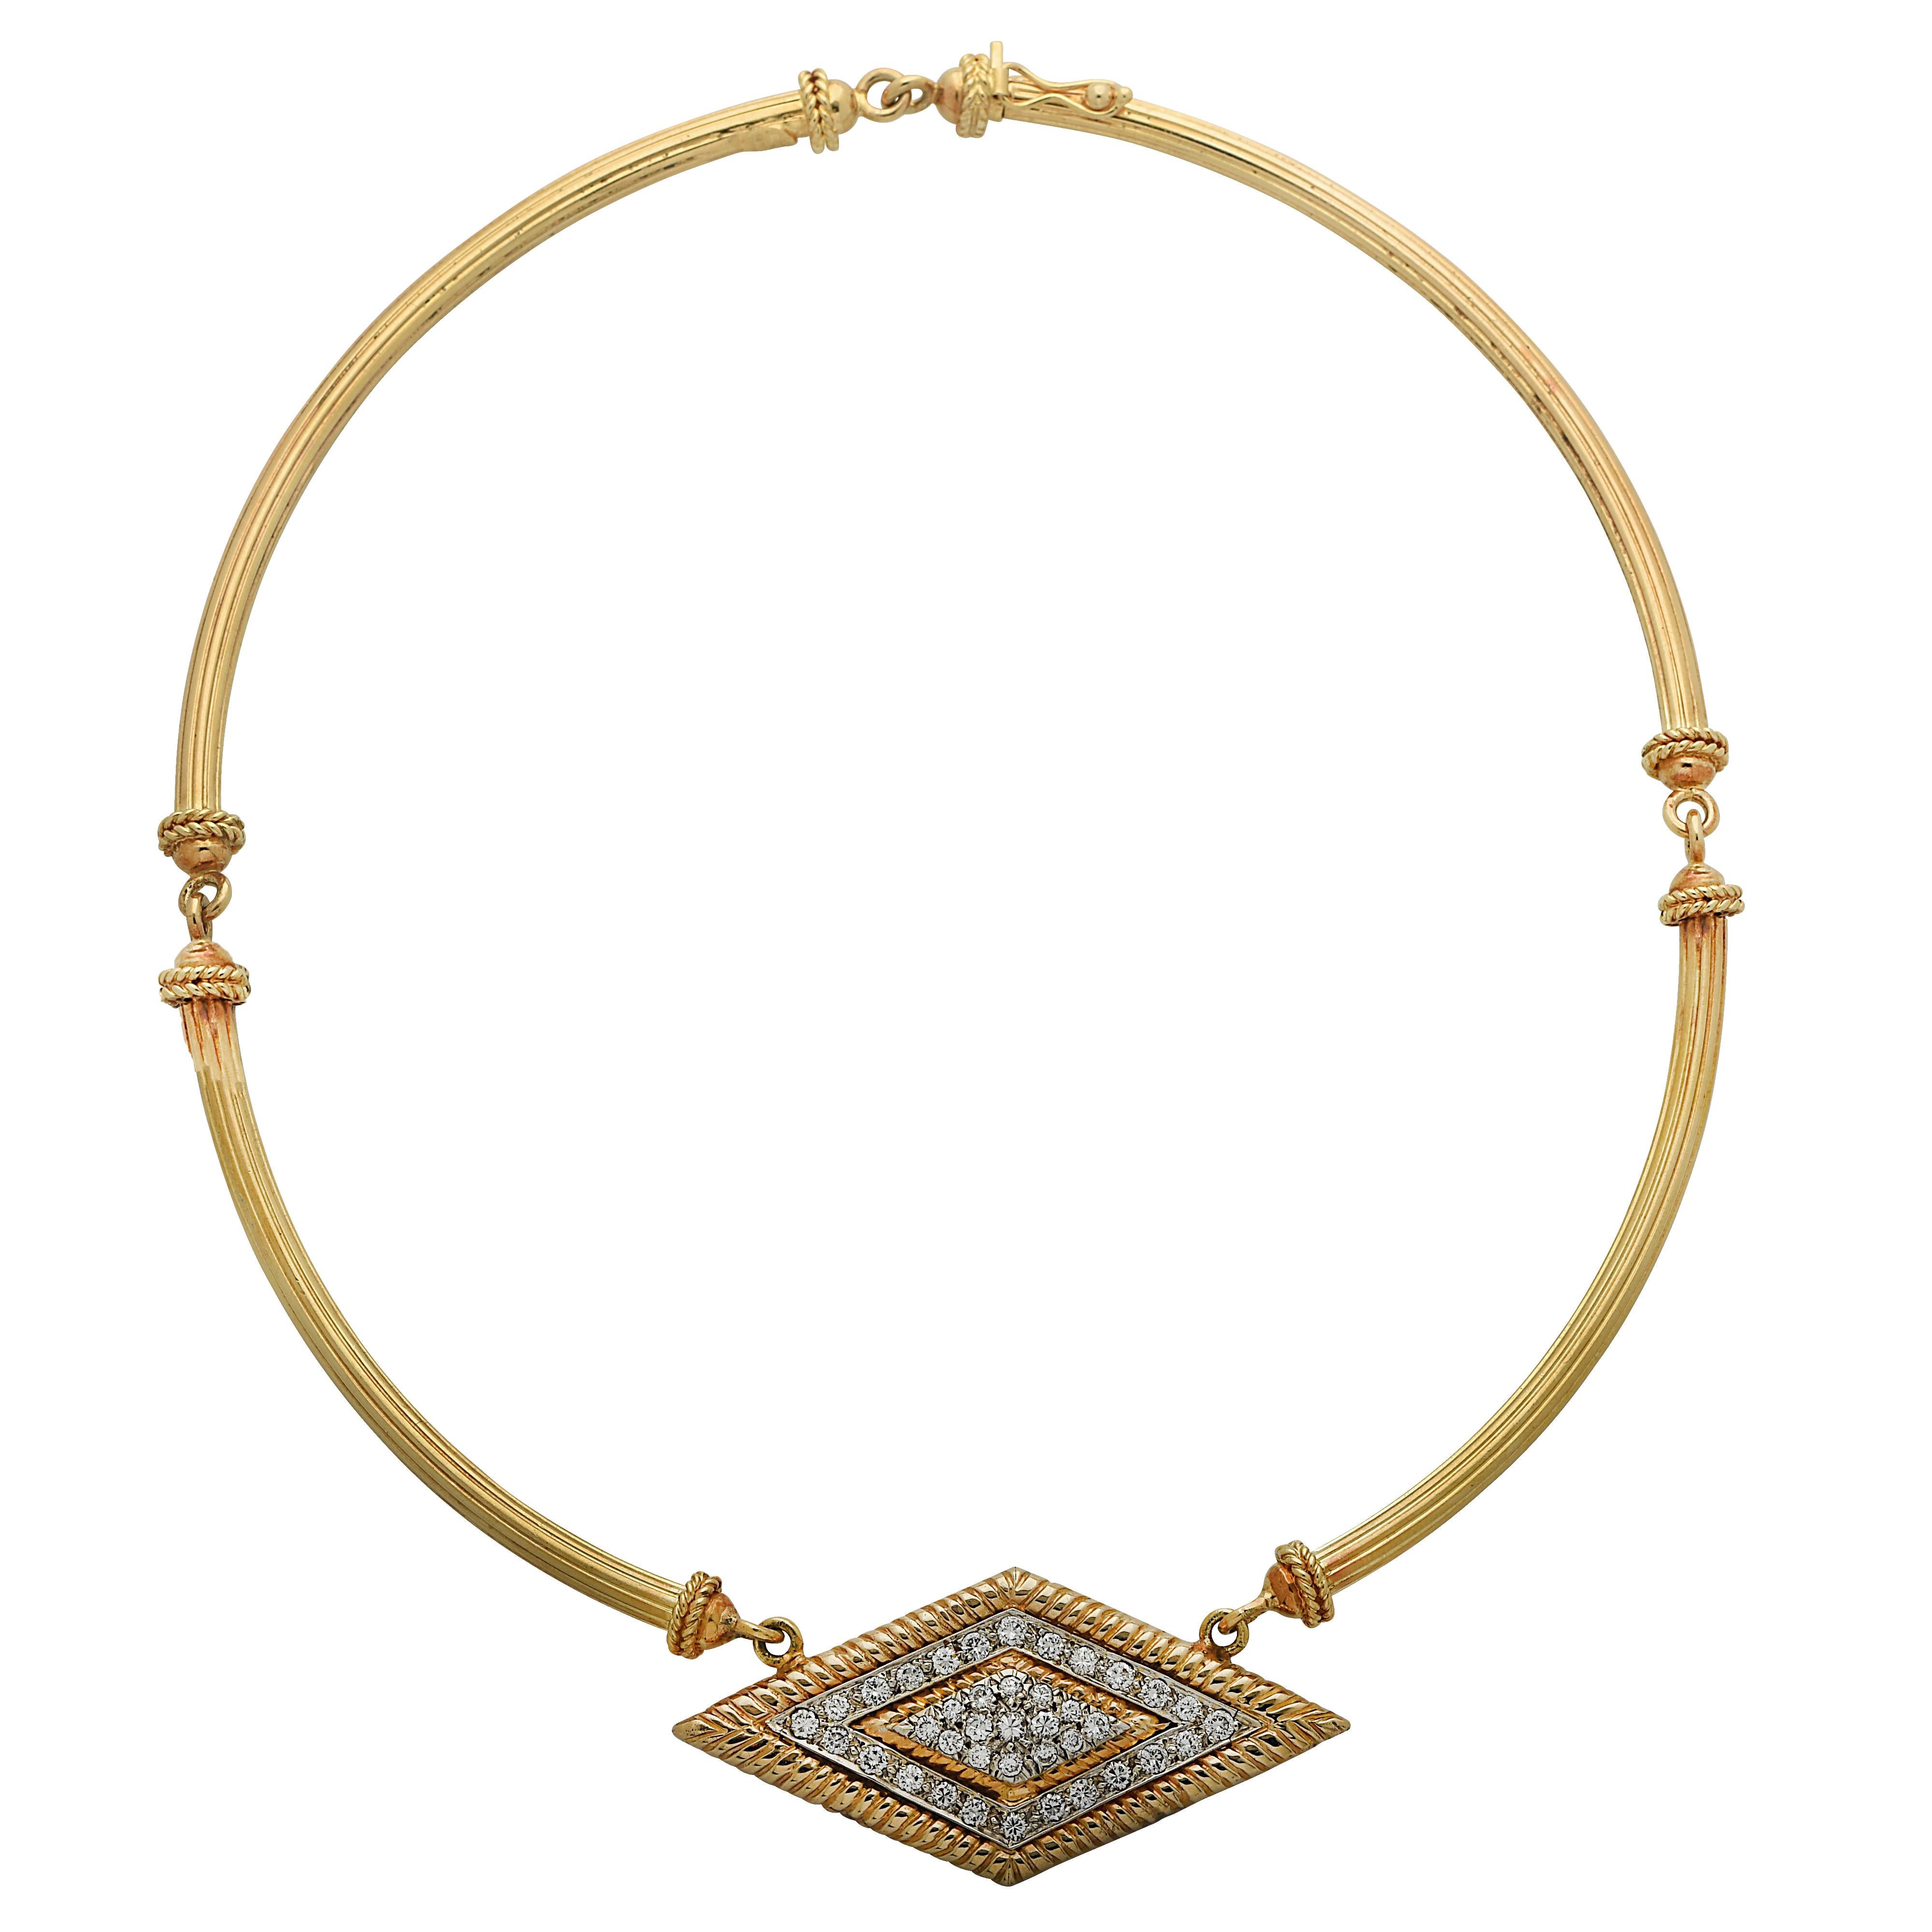 Tubular hinged collar necklace crafted in 18 karat yellow gold detailed with baubles, culminating in a diamond shaped plate crafted in 18 karat yellow and white gold, encrusted with 39 round brilliant cut diamonds weighing approximately 2 carats